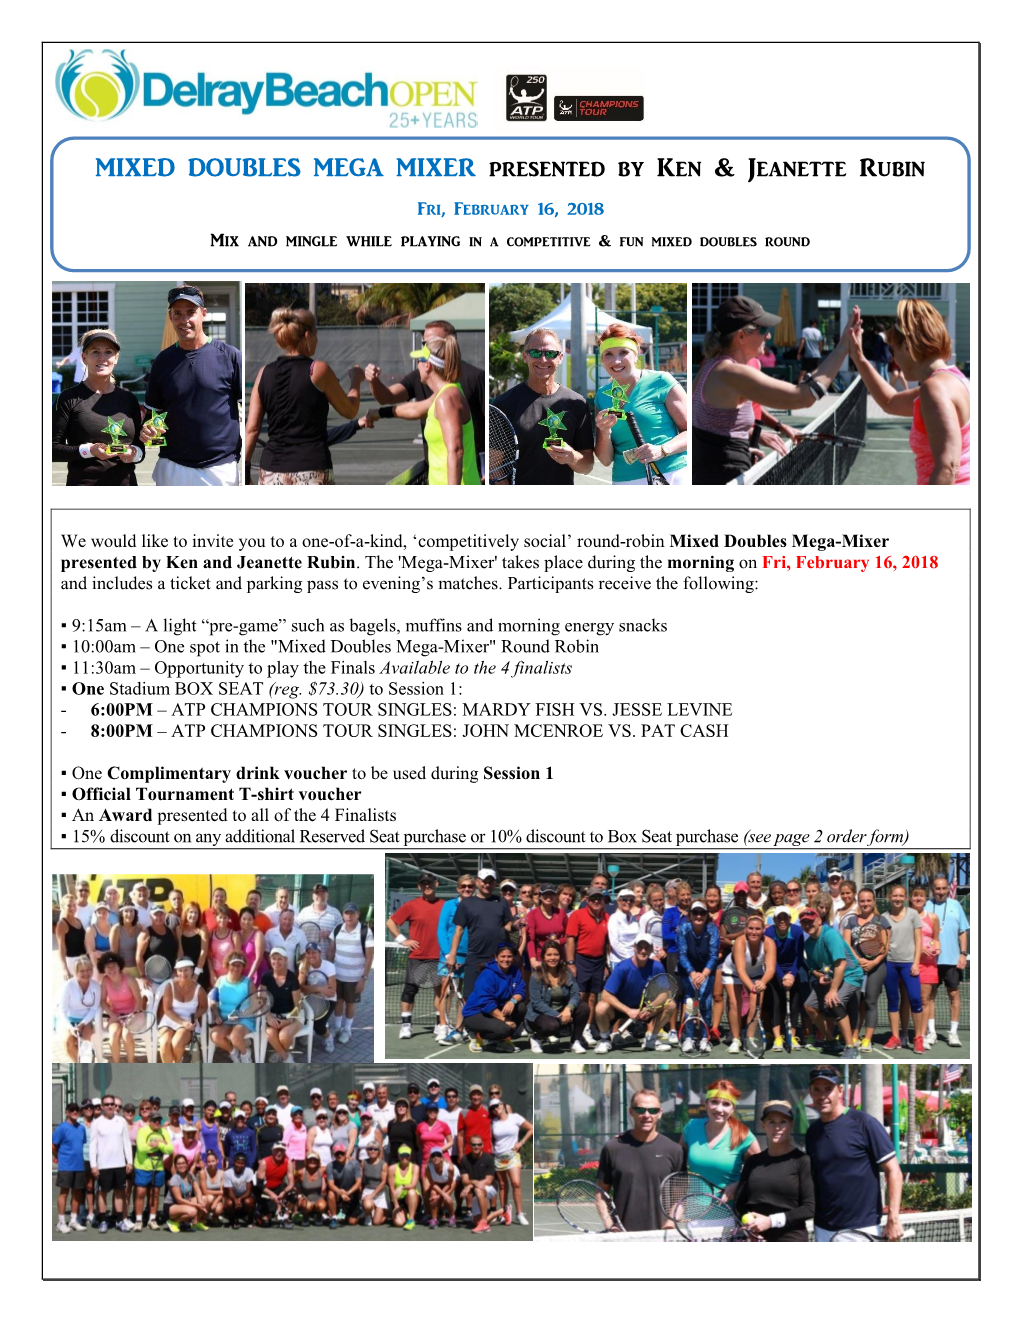 Mixed Doubles Mega-Mixer Presented by Ken and Jeanette Rubin